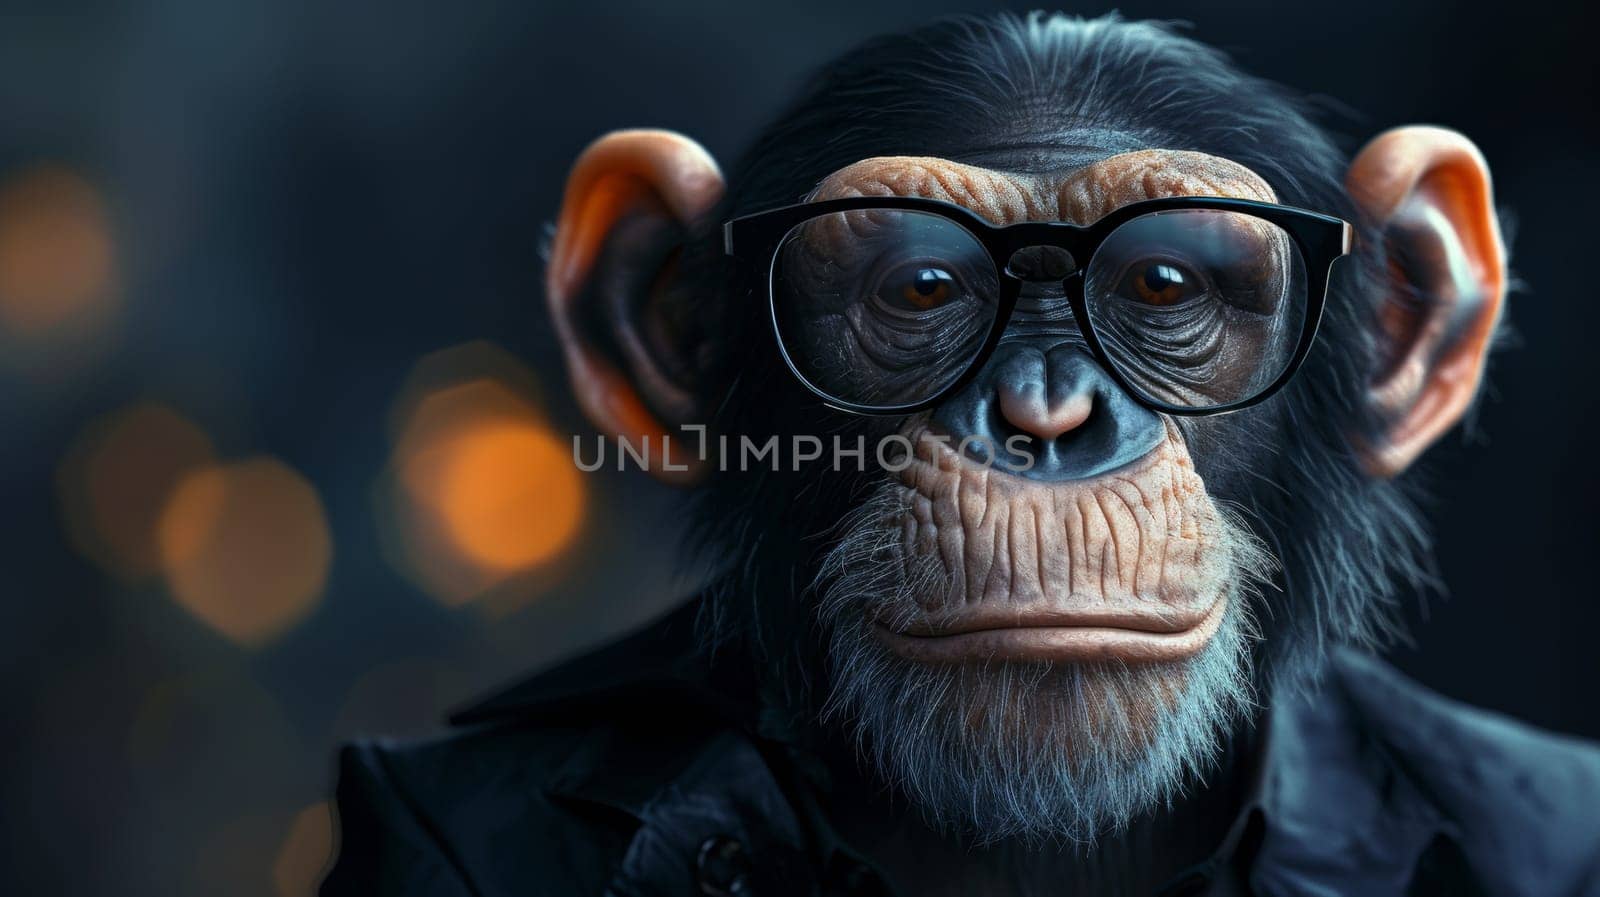 A monkey wearing glasses and a jacket with dark background